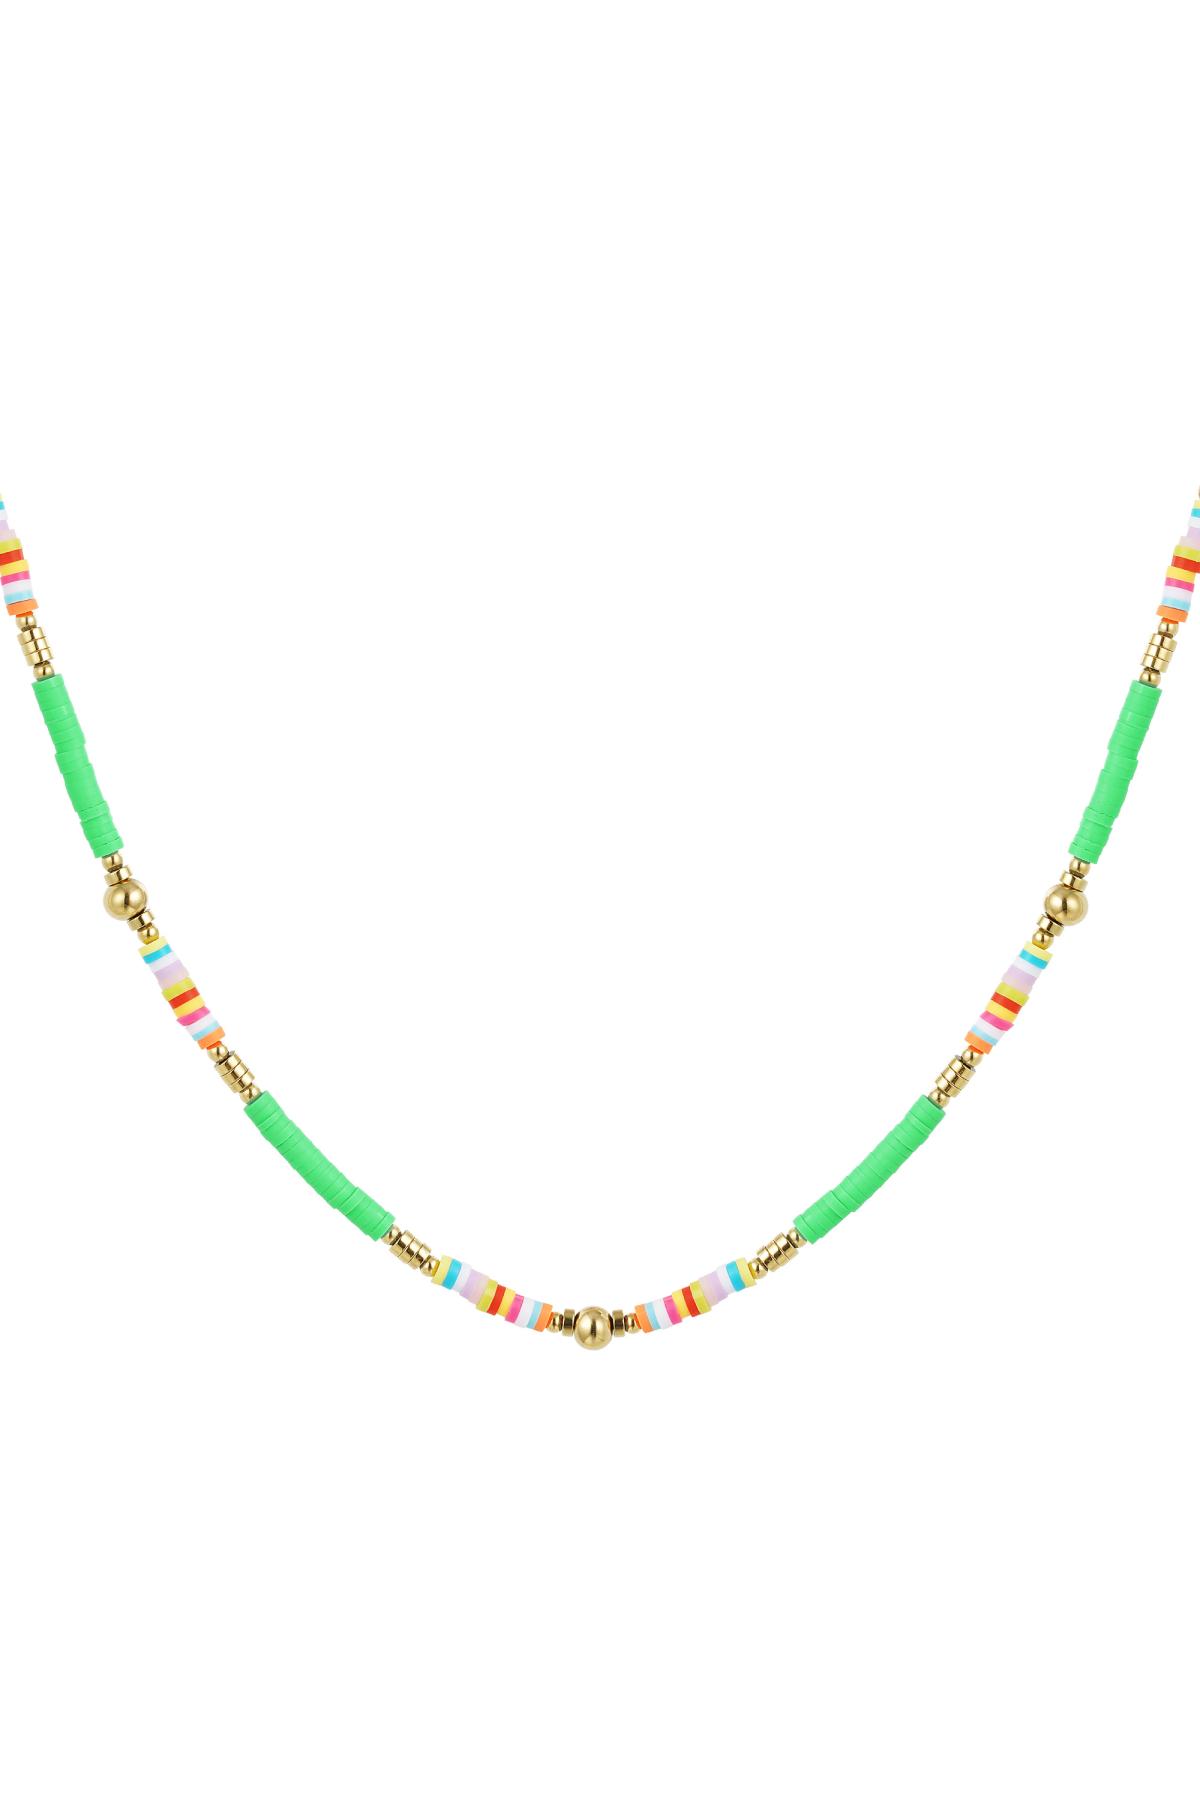 Beaded necklace cheerful Green &amp; Gold Hematite